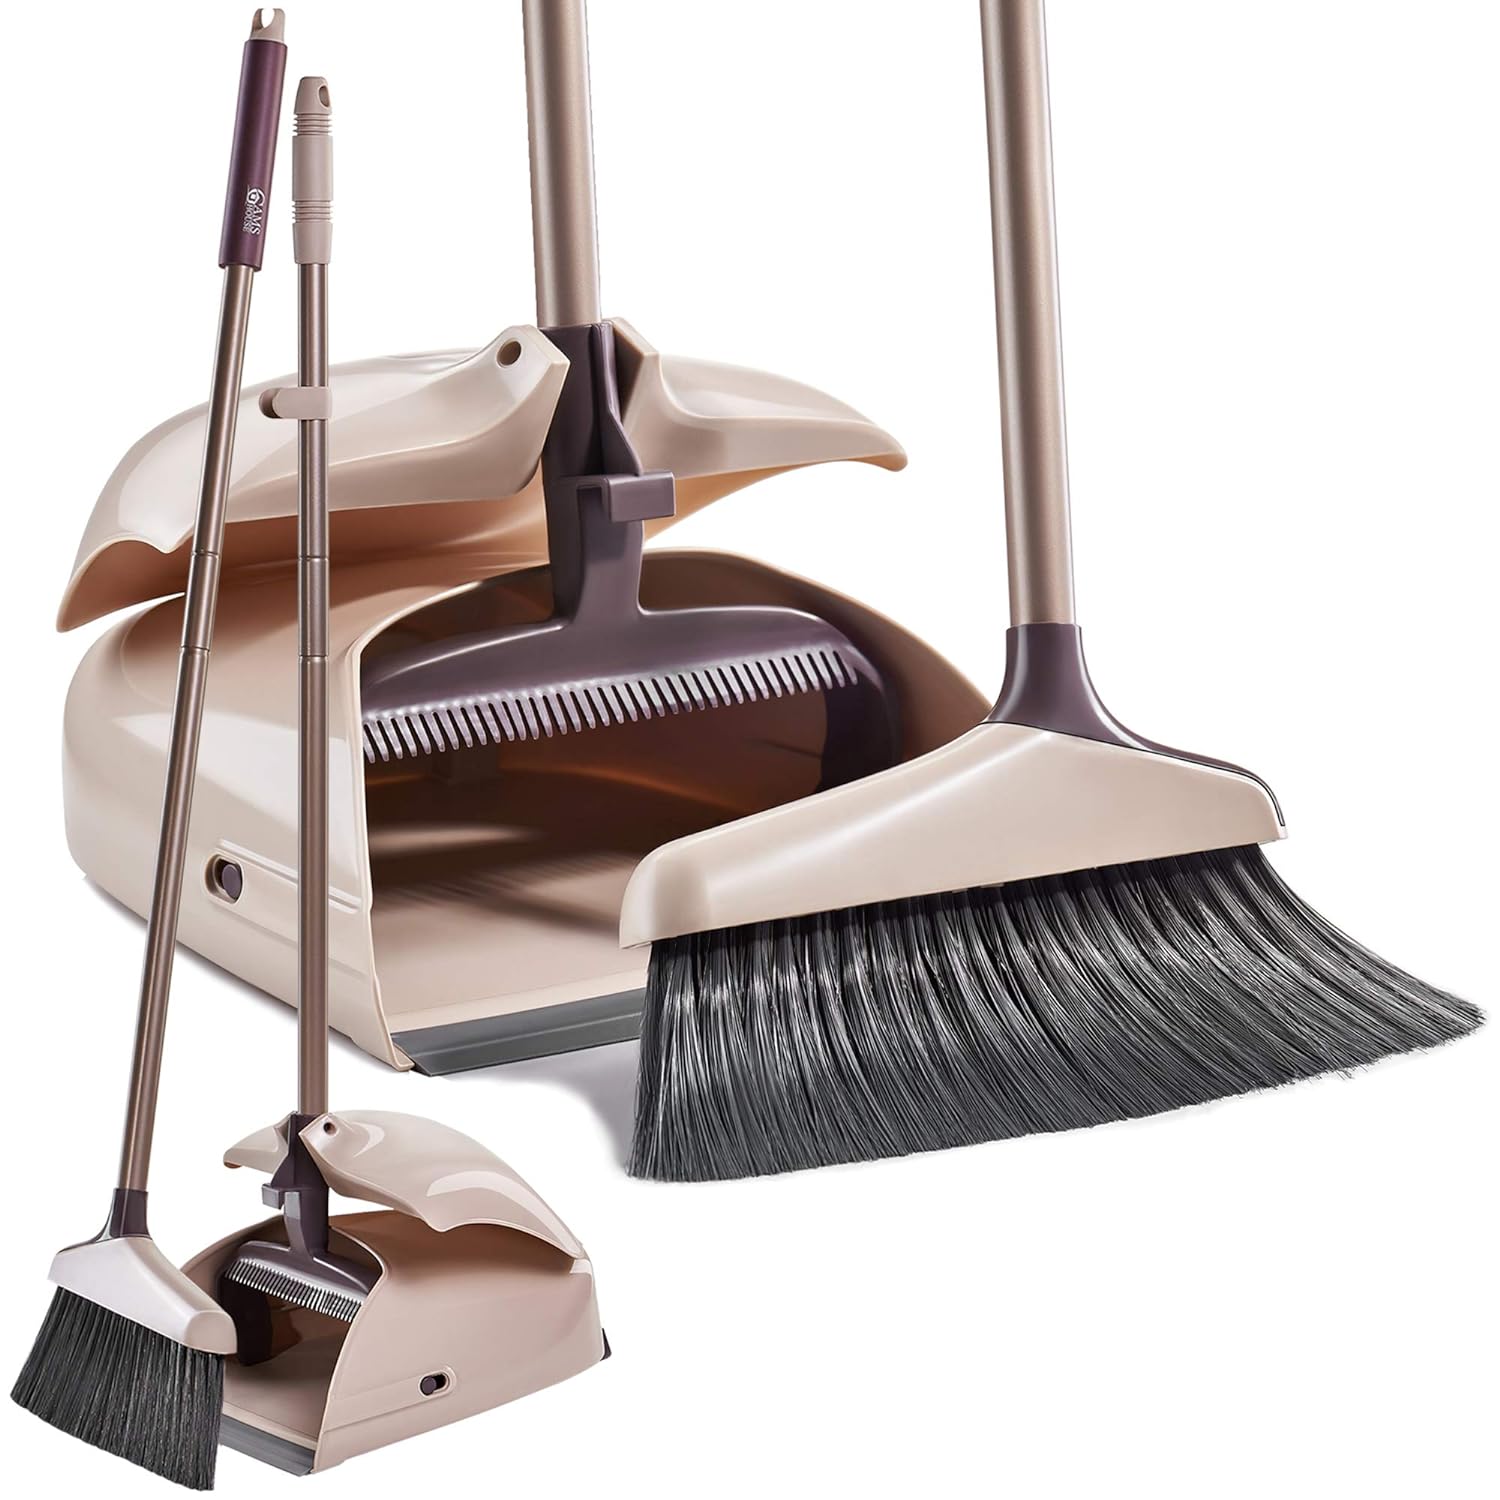 A broom and dustpan